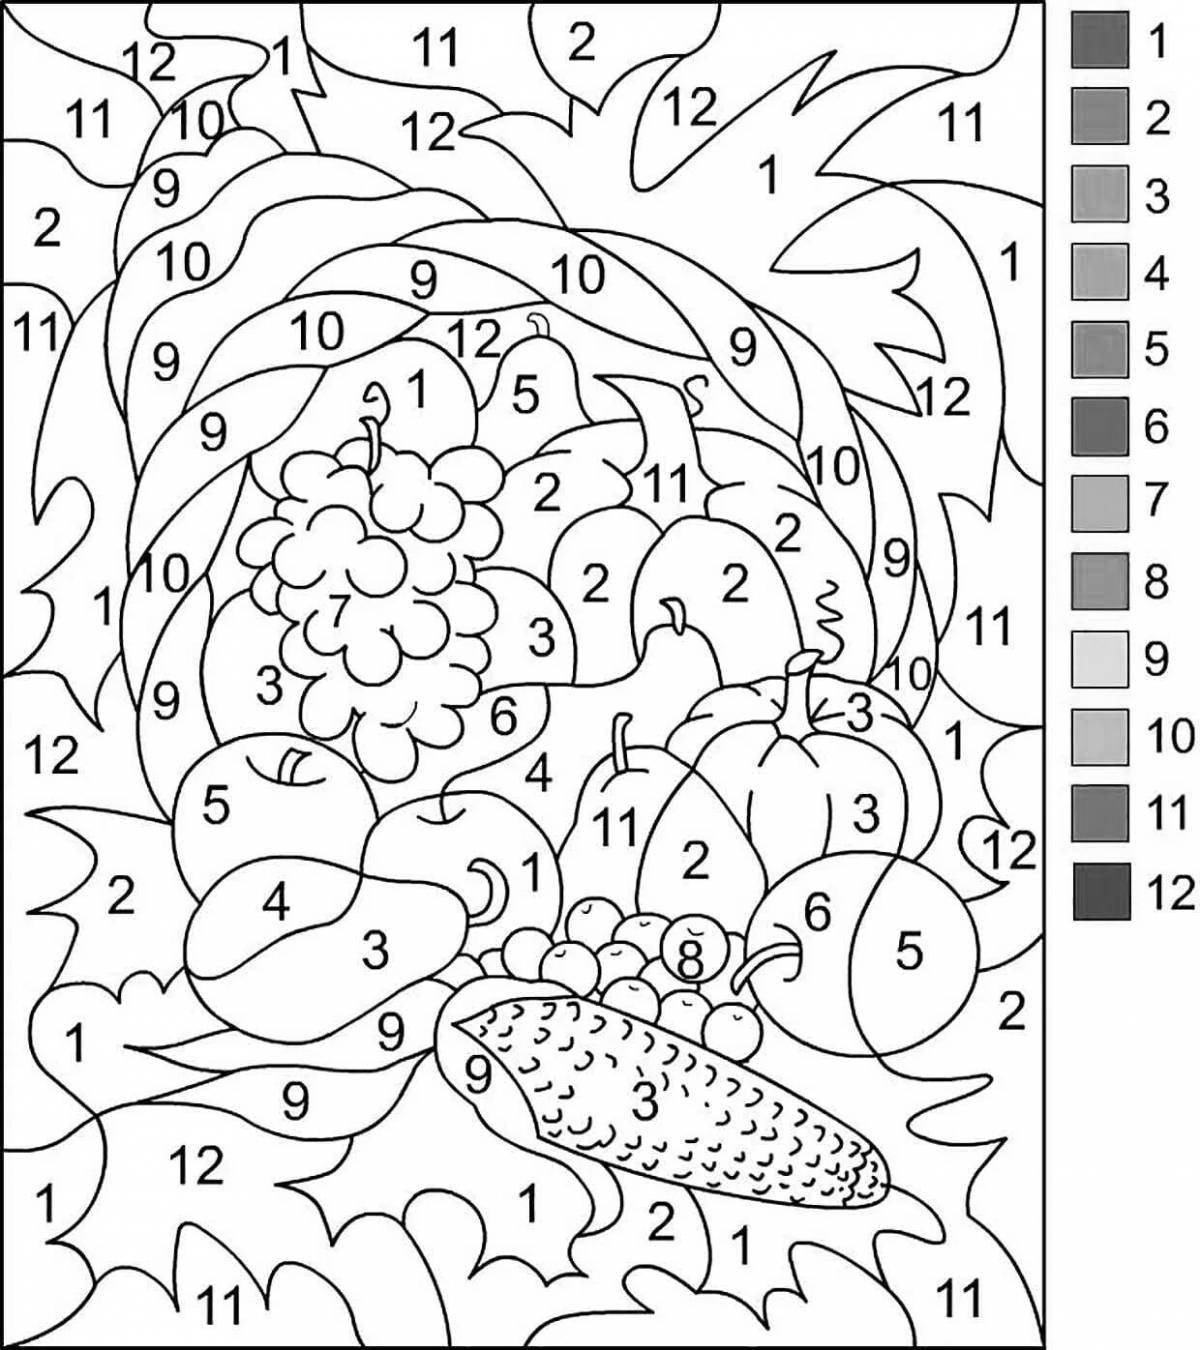 Color-frenzy coloring by numbers for kids 5 6